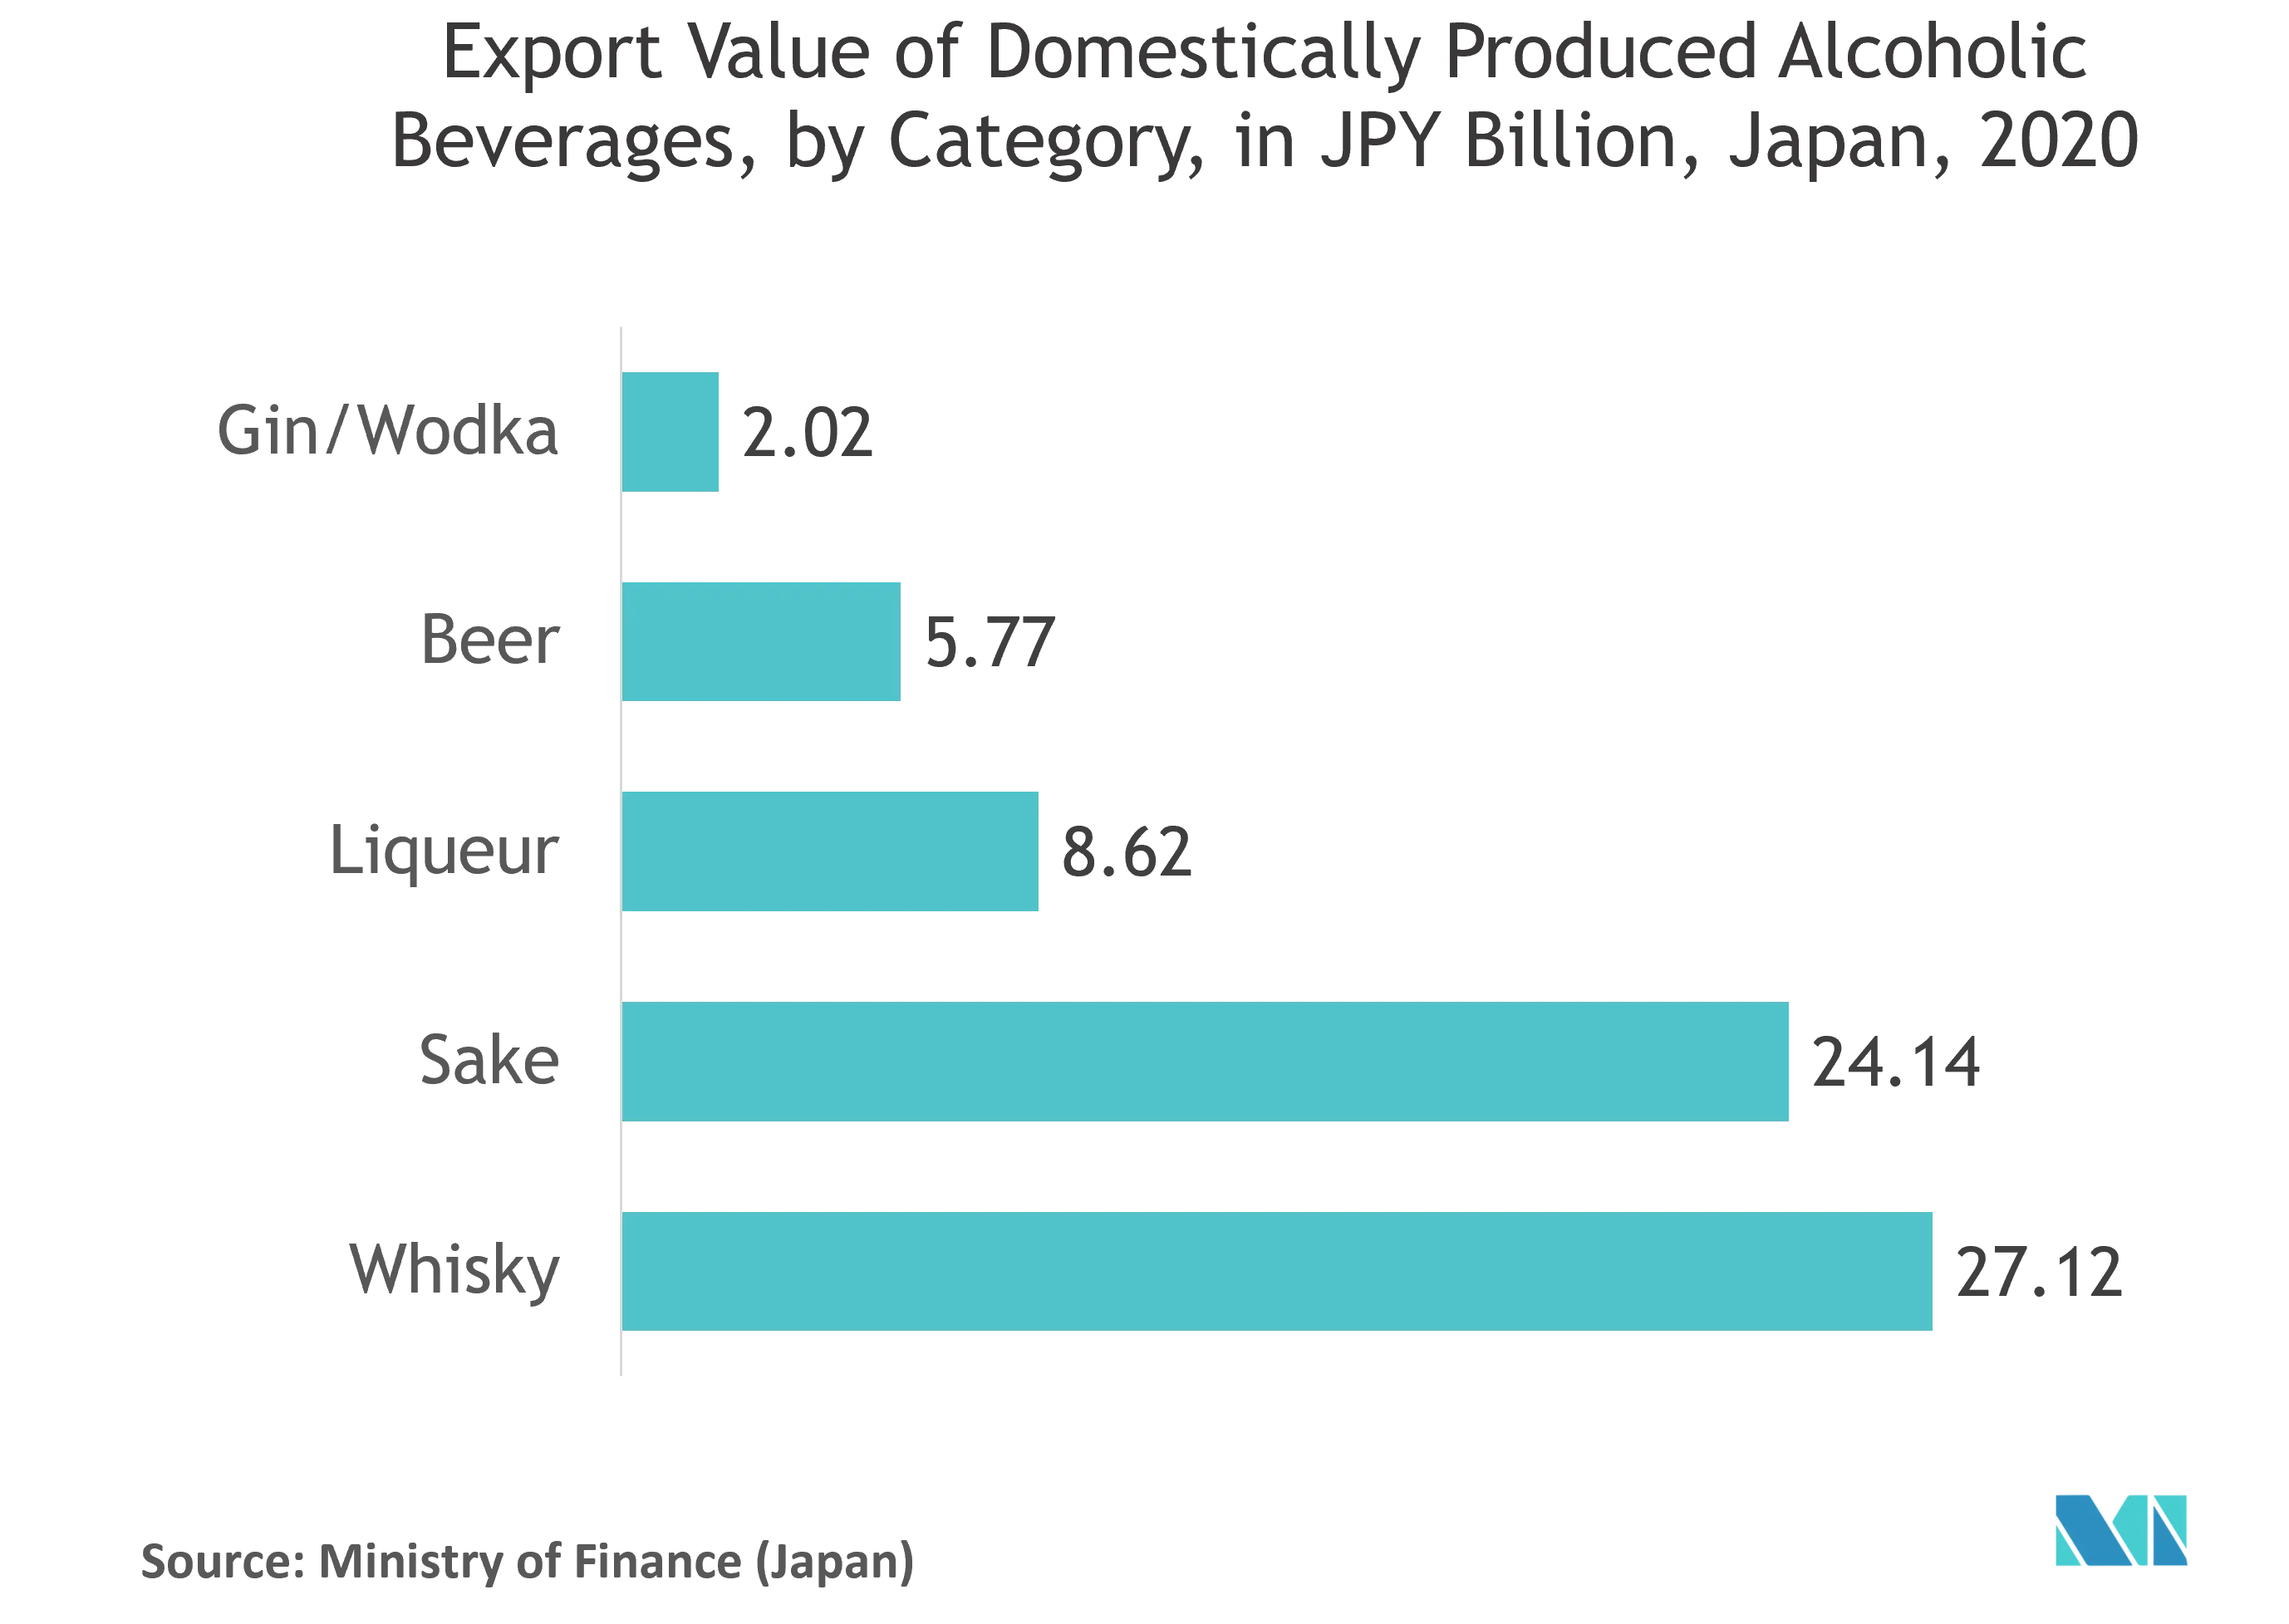 Japan Plastic Packaging Market: Export Value of Domestically Produced Alcoholic Beverages, by Category, in PY Bilion, Japan, 2020